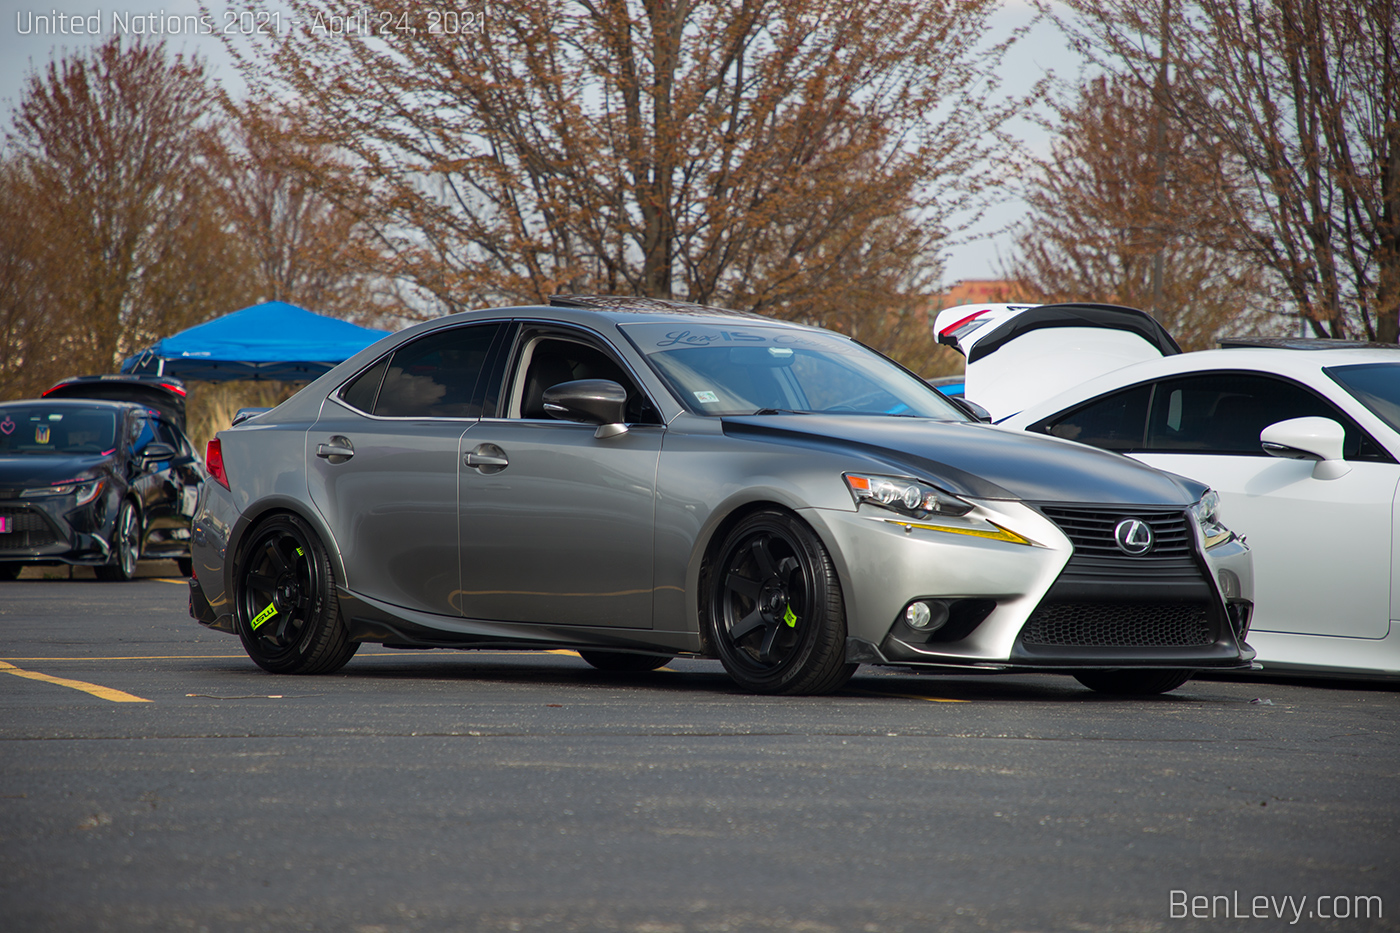 Lexus IS250 at Chicago-area Car Show